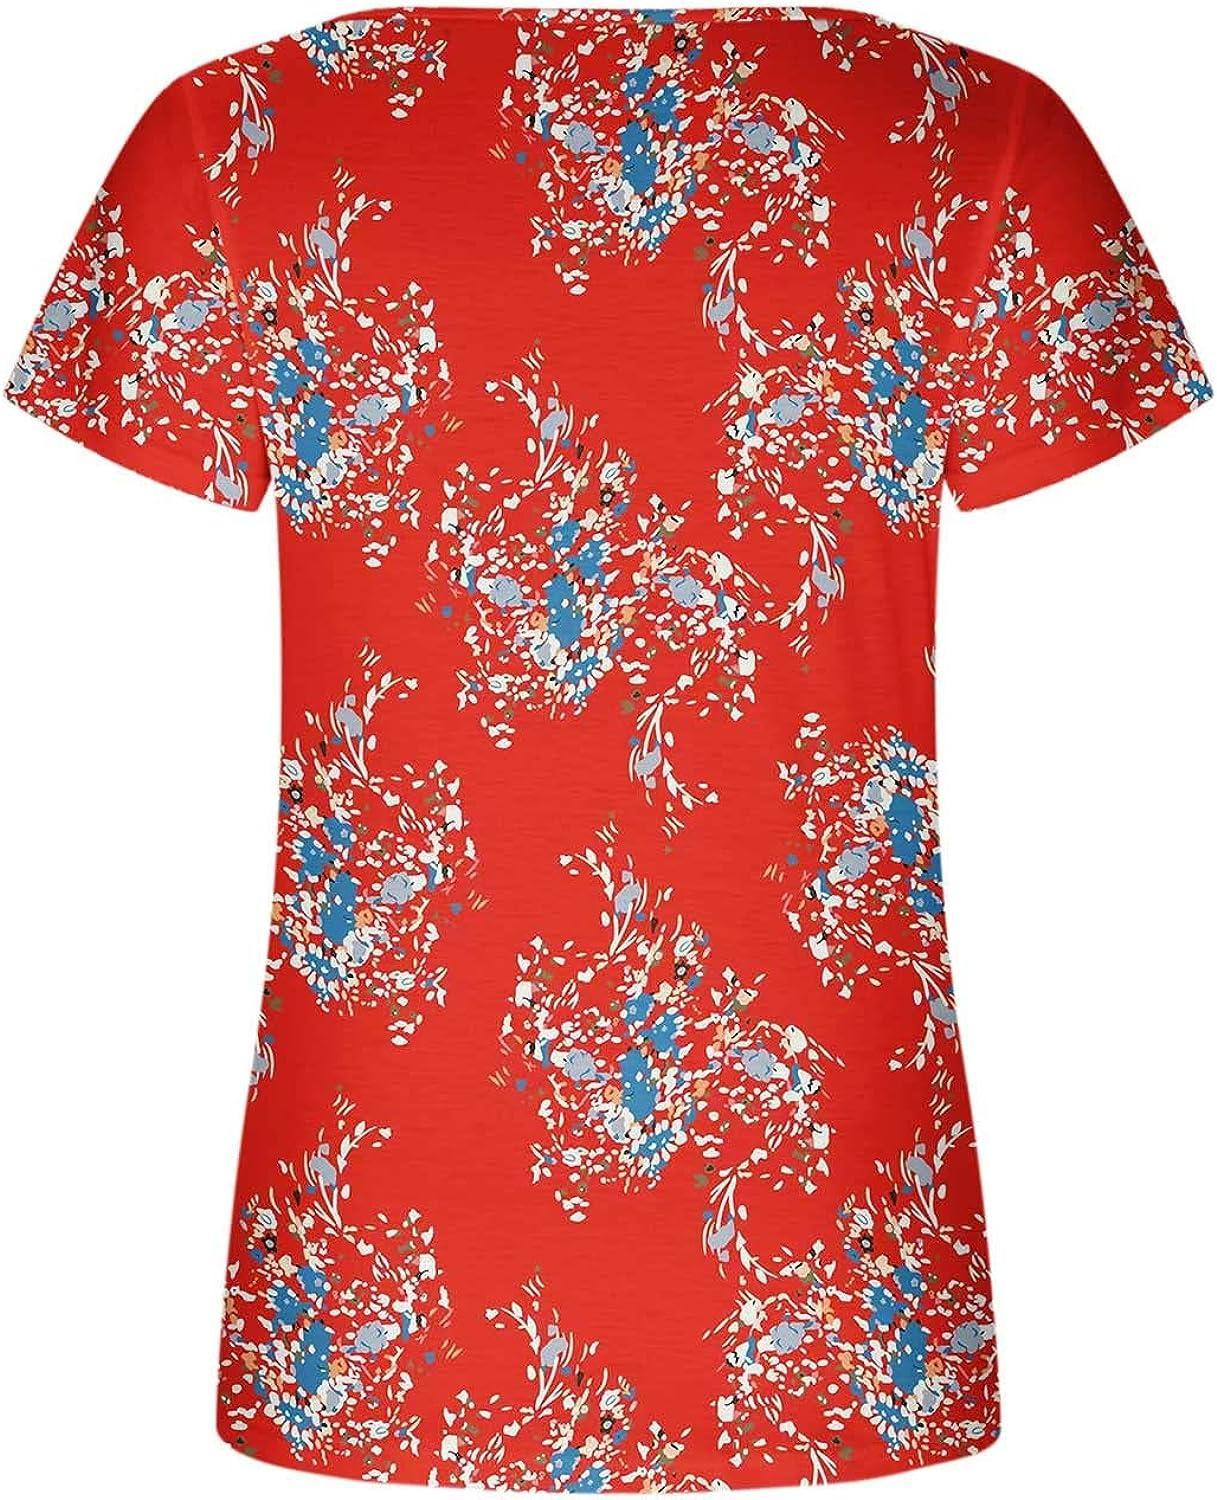 Womens Summer Tops Dressy Casual Square Neck T-Shirts Floral Print